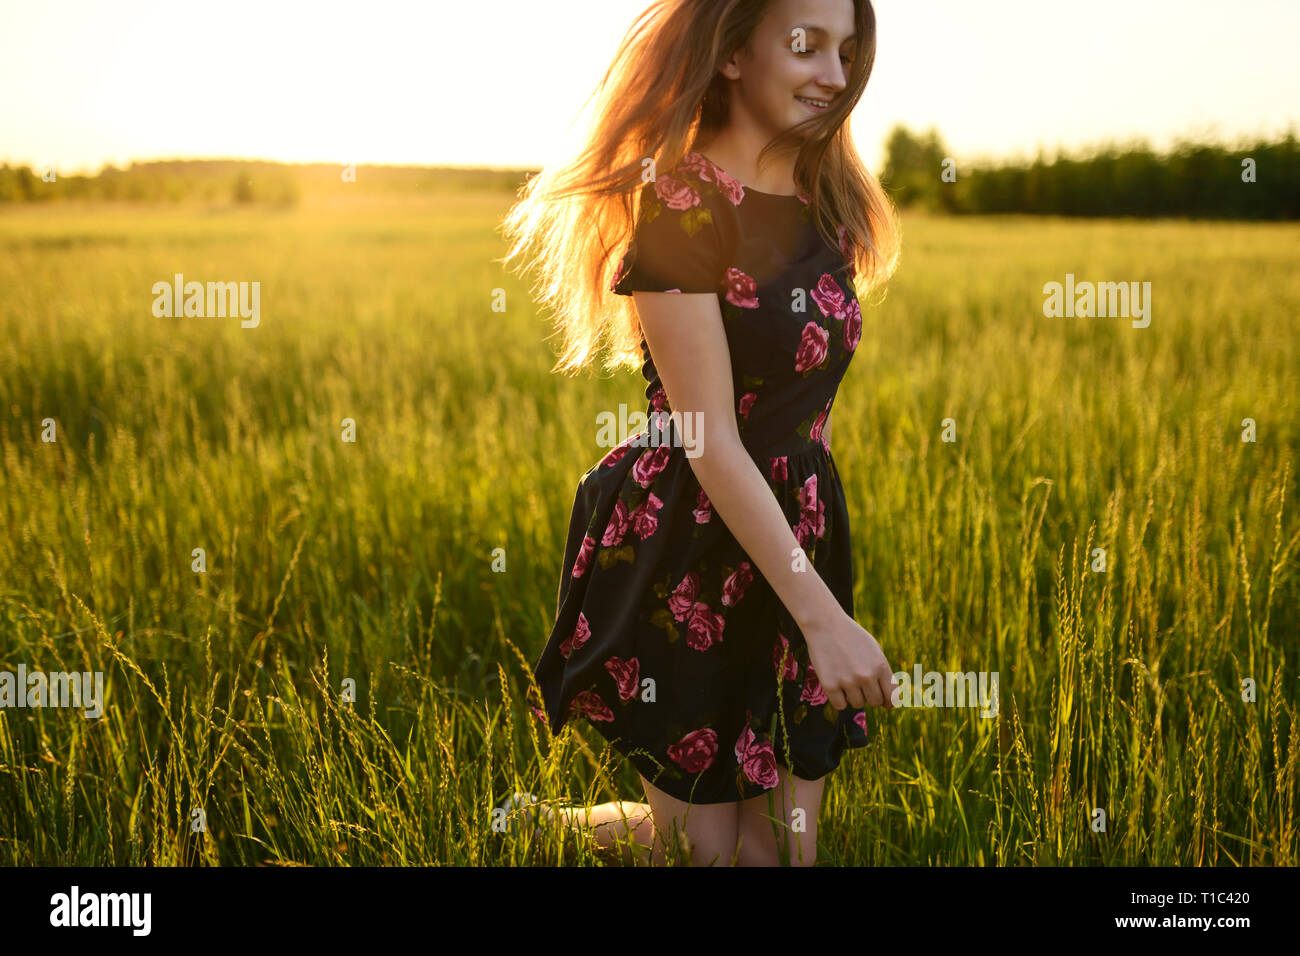 Young girl in flower dress, is running or jumping from happiness on a green meadow. She is smiling and her long hair are flowing on wind, all lit by w Stock Photo